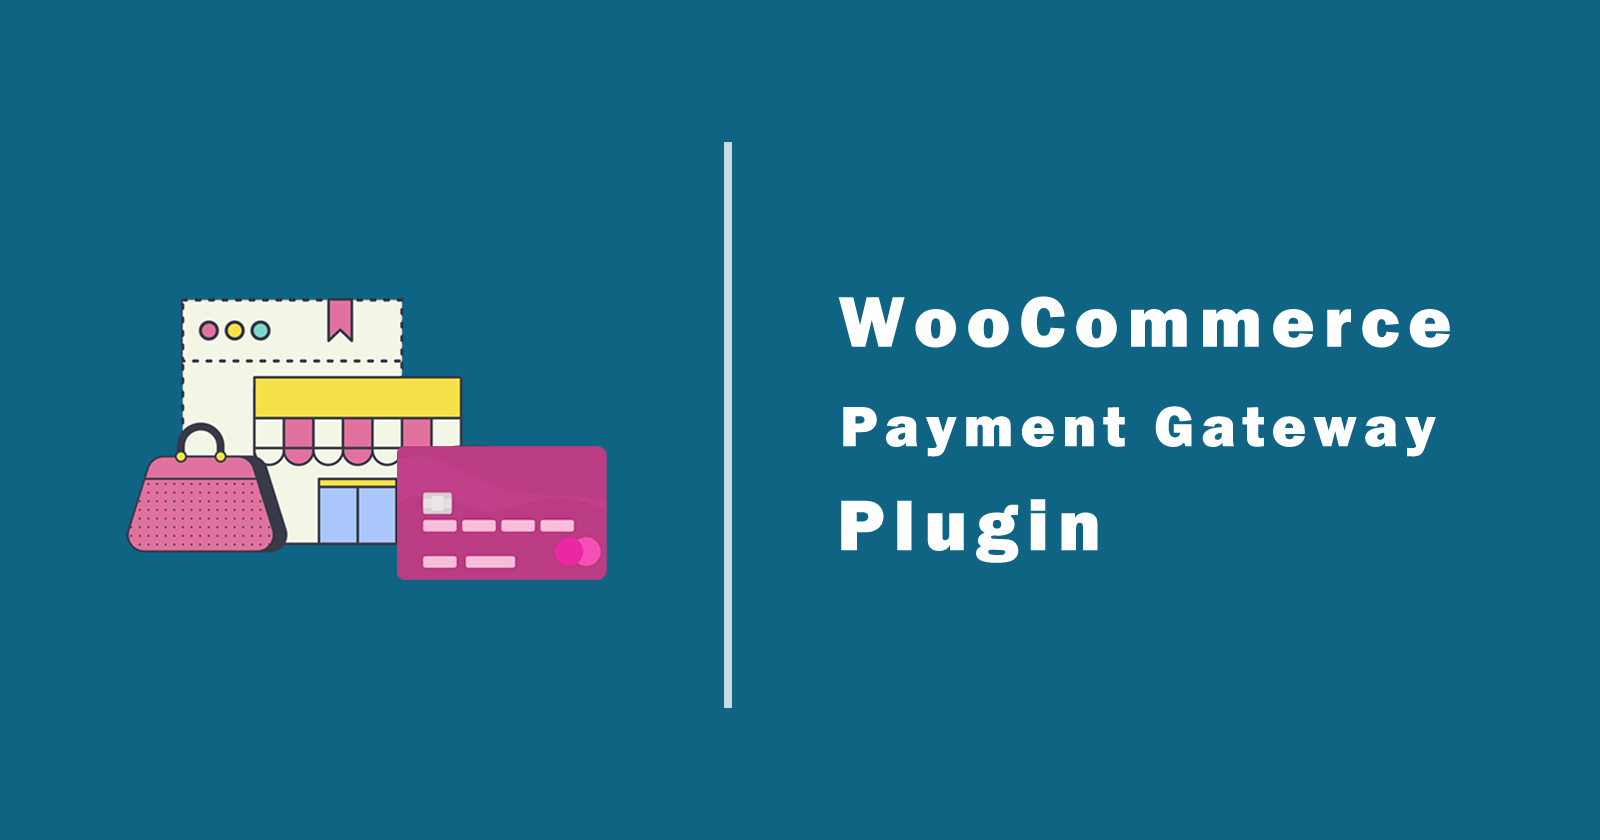 How to Create a WooCommerce Payment Gateway Plugin?